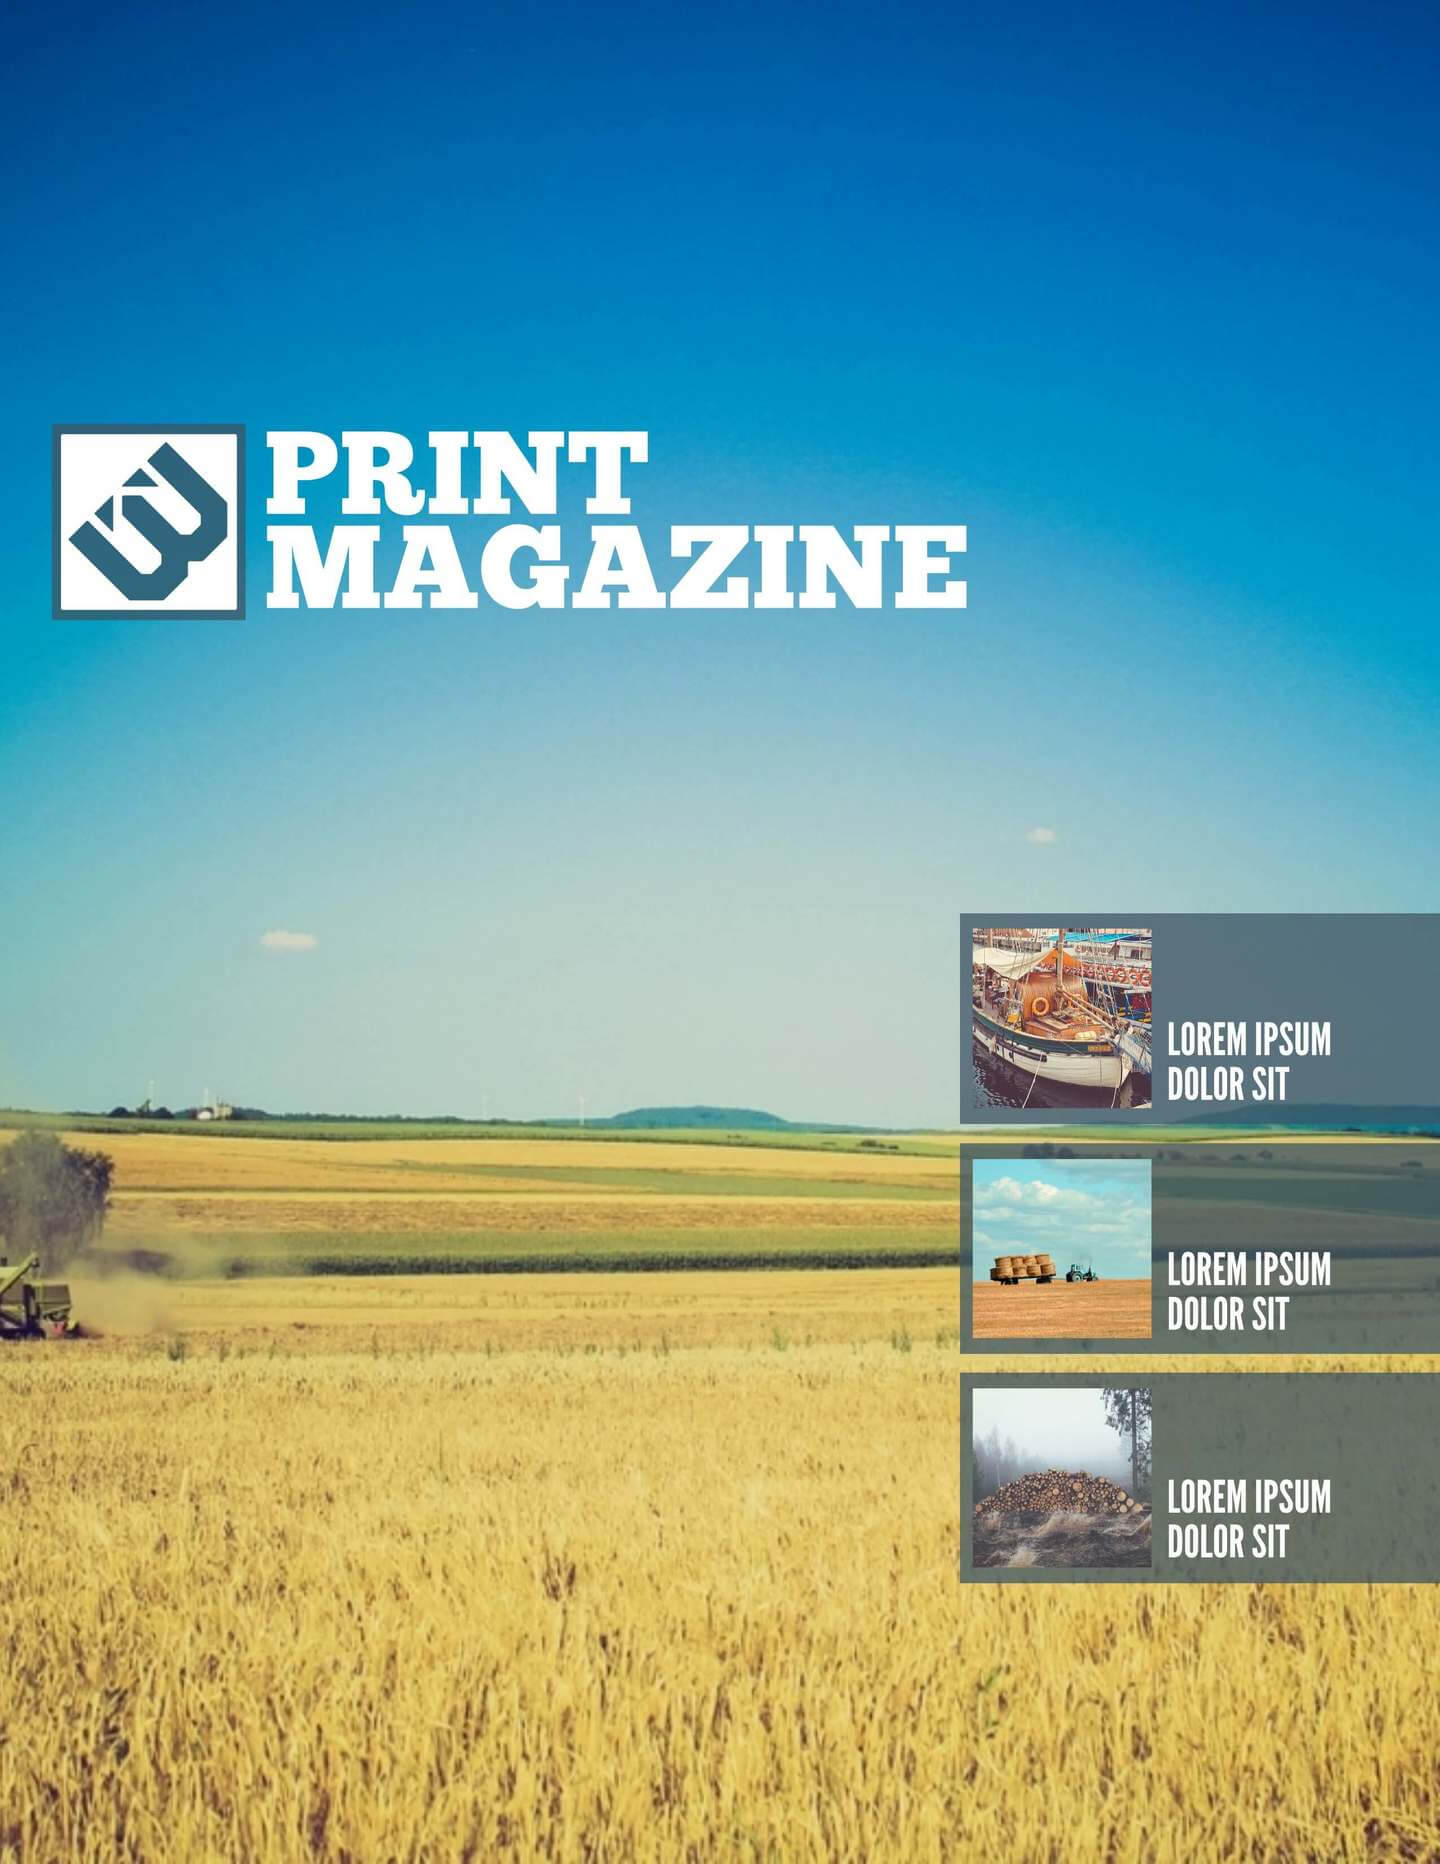 Free Magazine Templates + Magazine Cover Designs Throughout Magazine Template For Microsoft Word